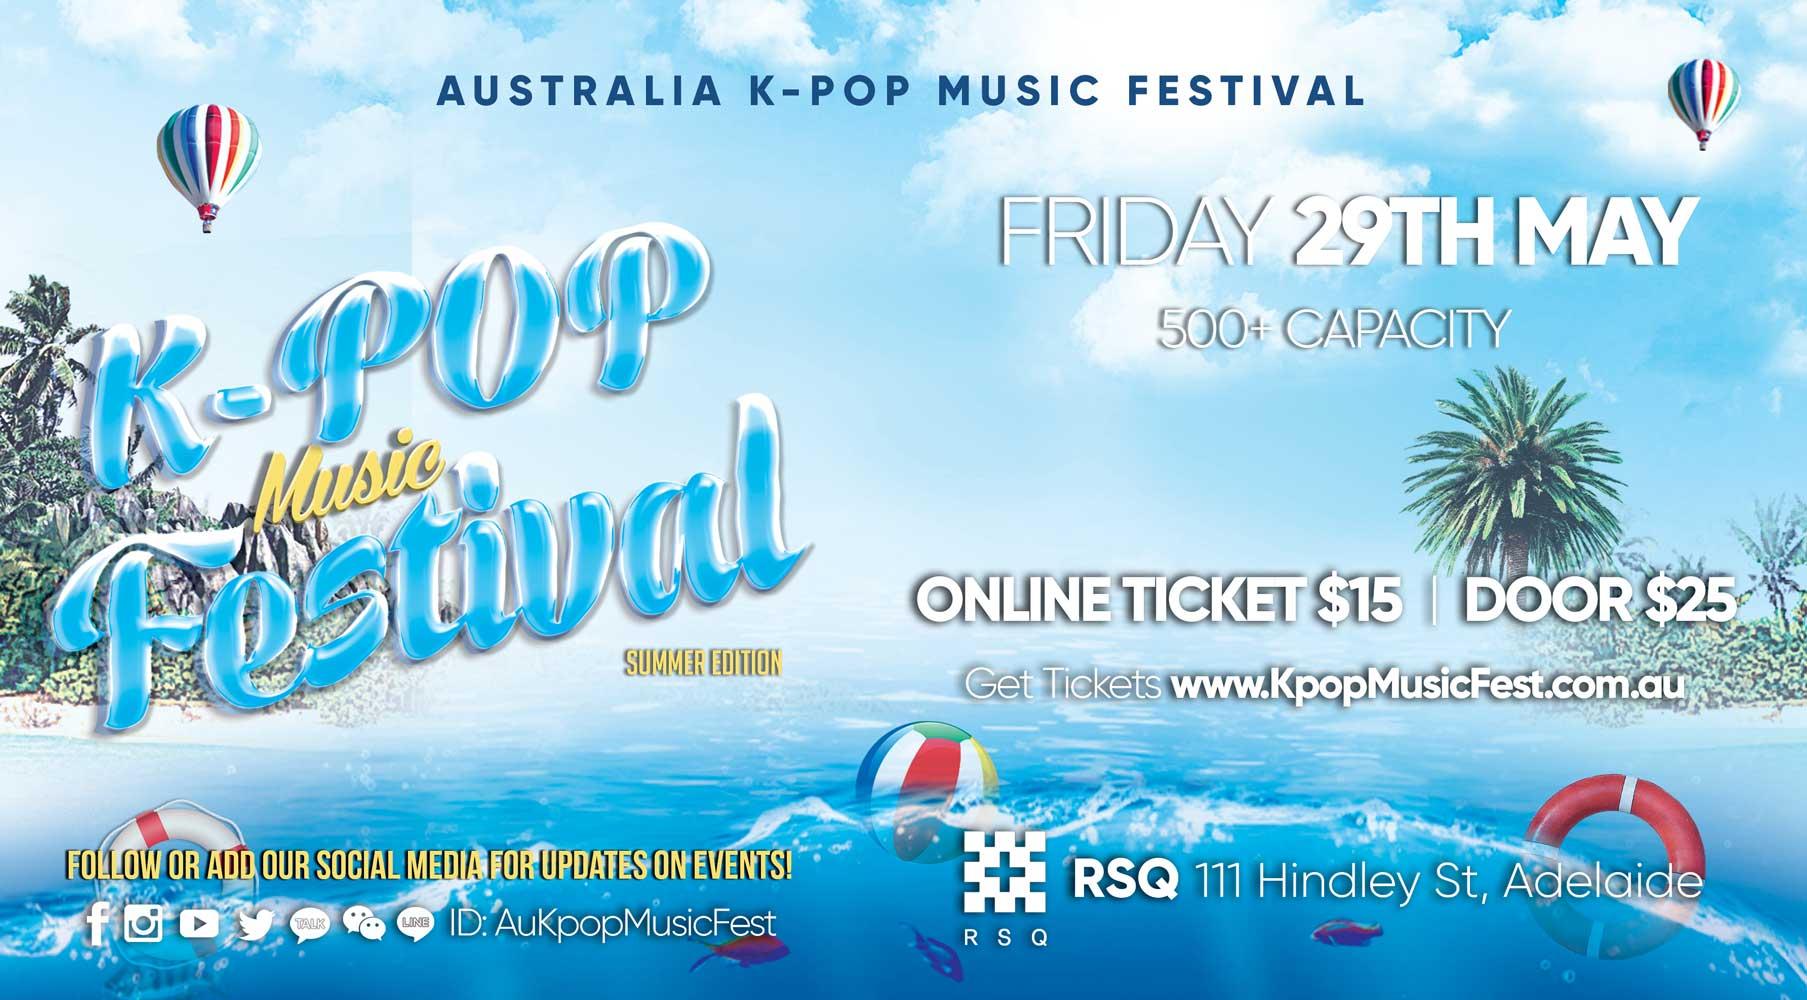 Adelaide Kpop Music Festival Friday 29th May [Early Bird ON SALE NOW]